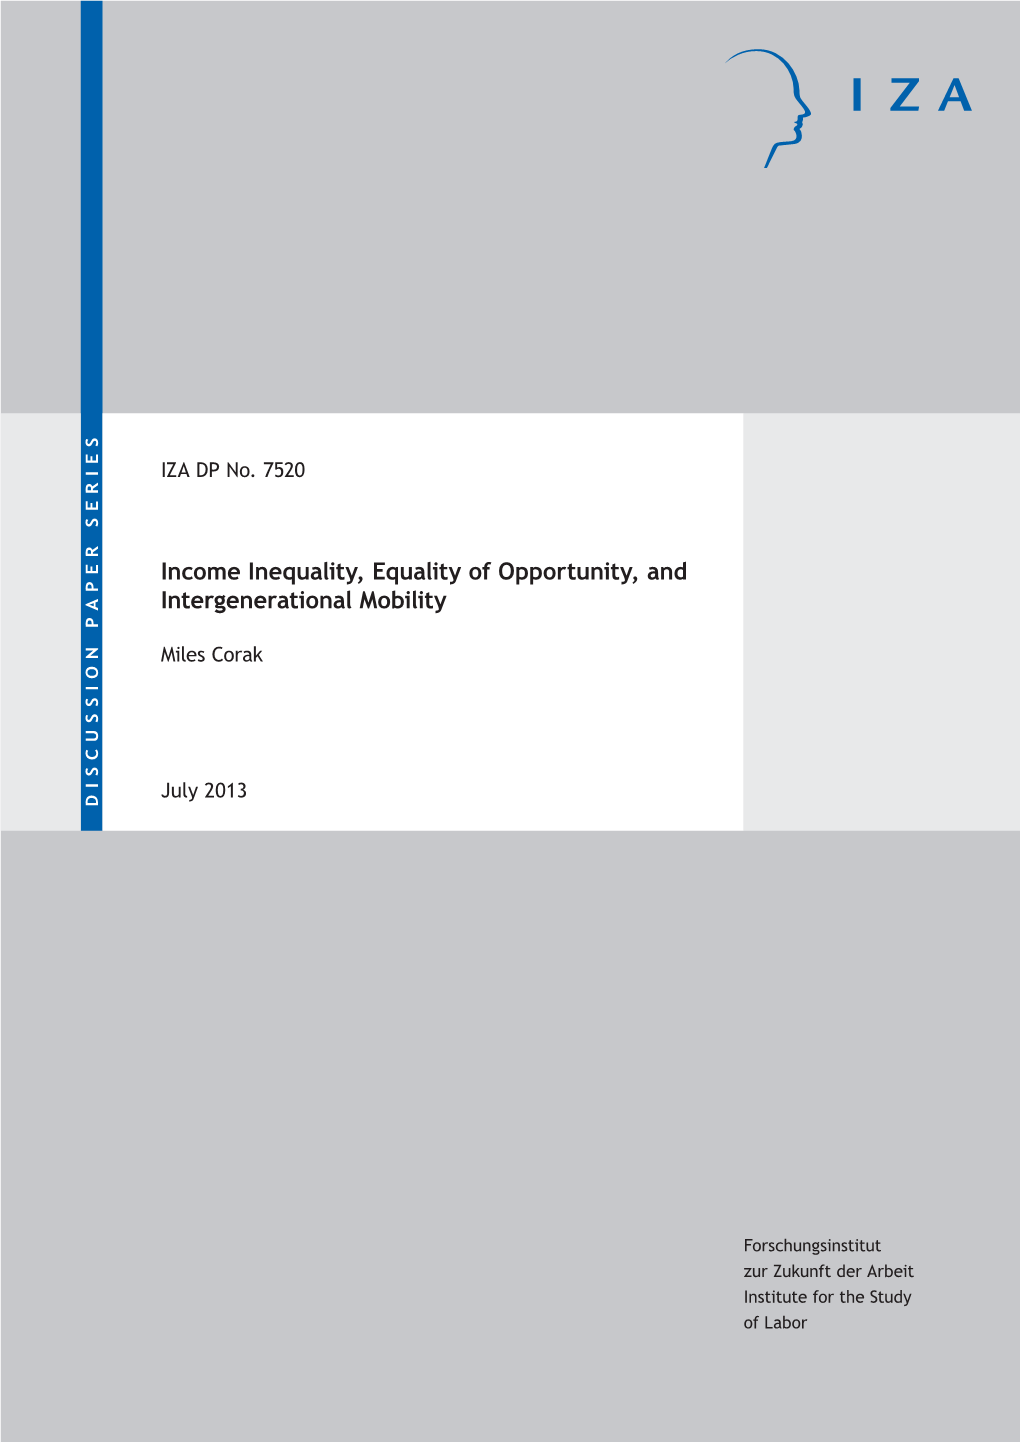 Income Inequality, Equality of Opportunity, and Intergenerational Mobility